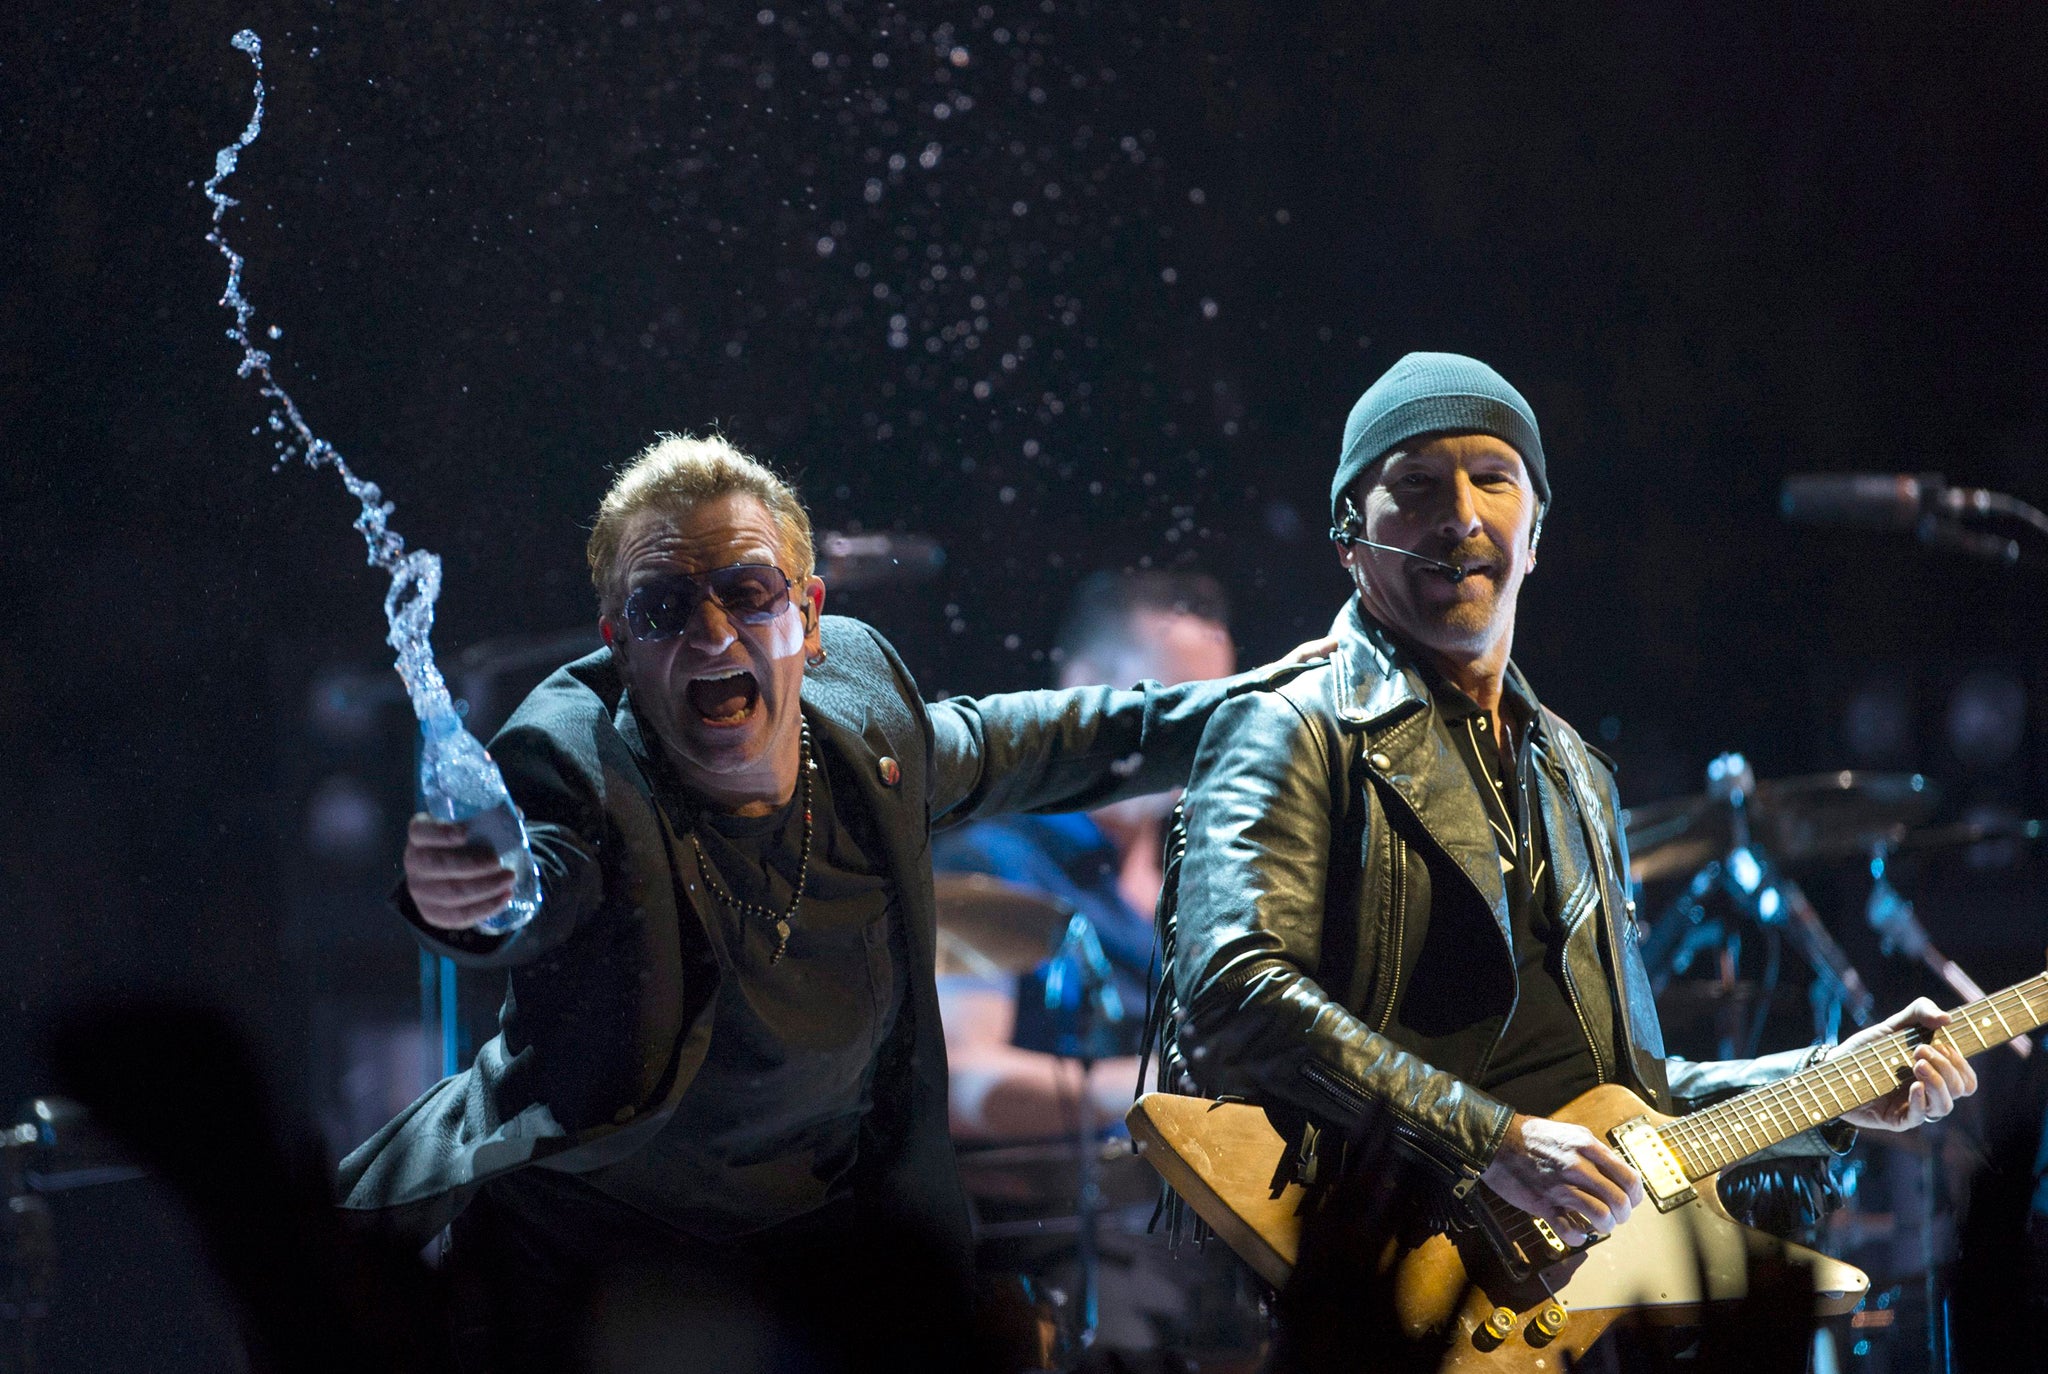 Bono throws water at the crowd while the Edge watches as they perform in the band's first concert of their new world tour in Vancouver